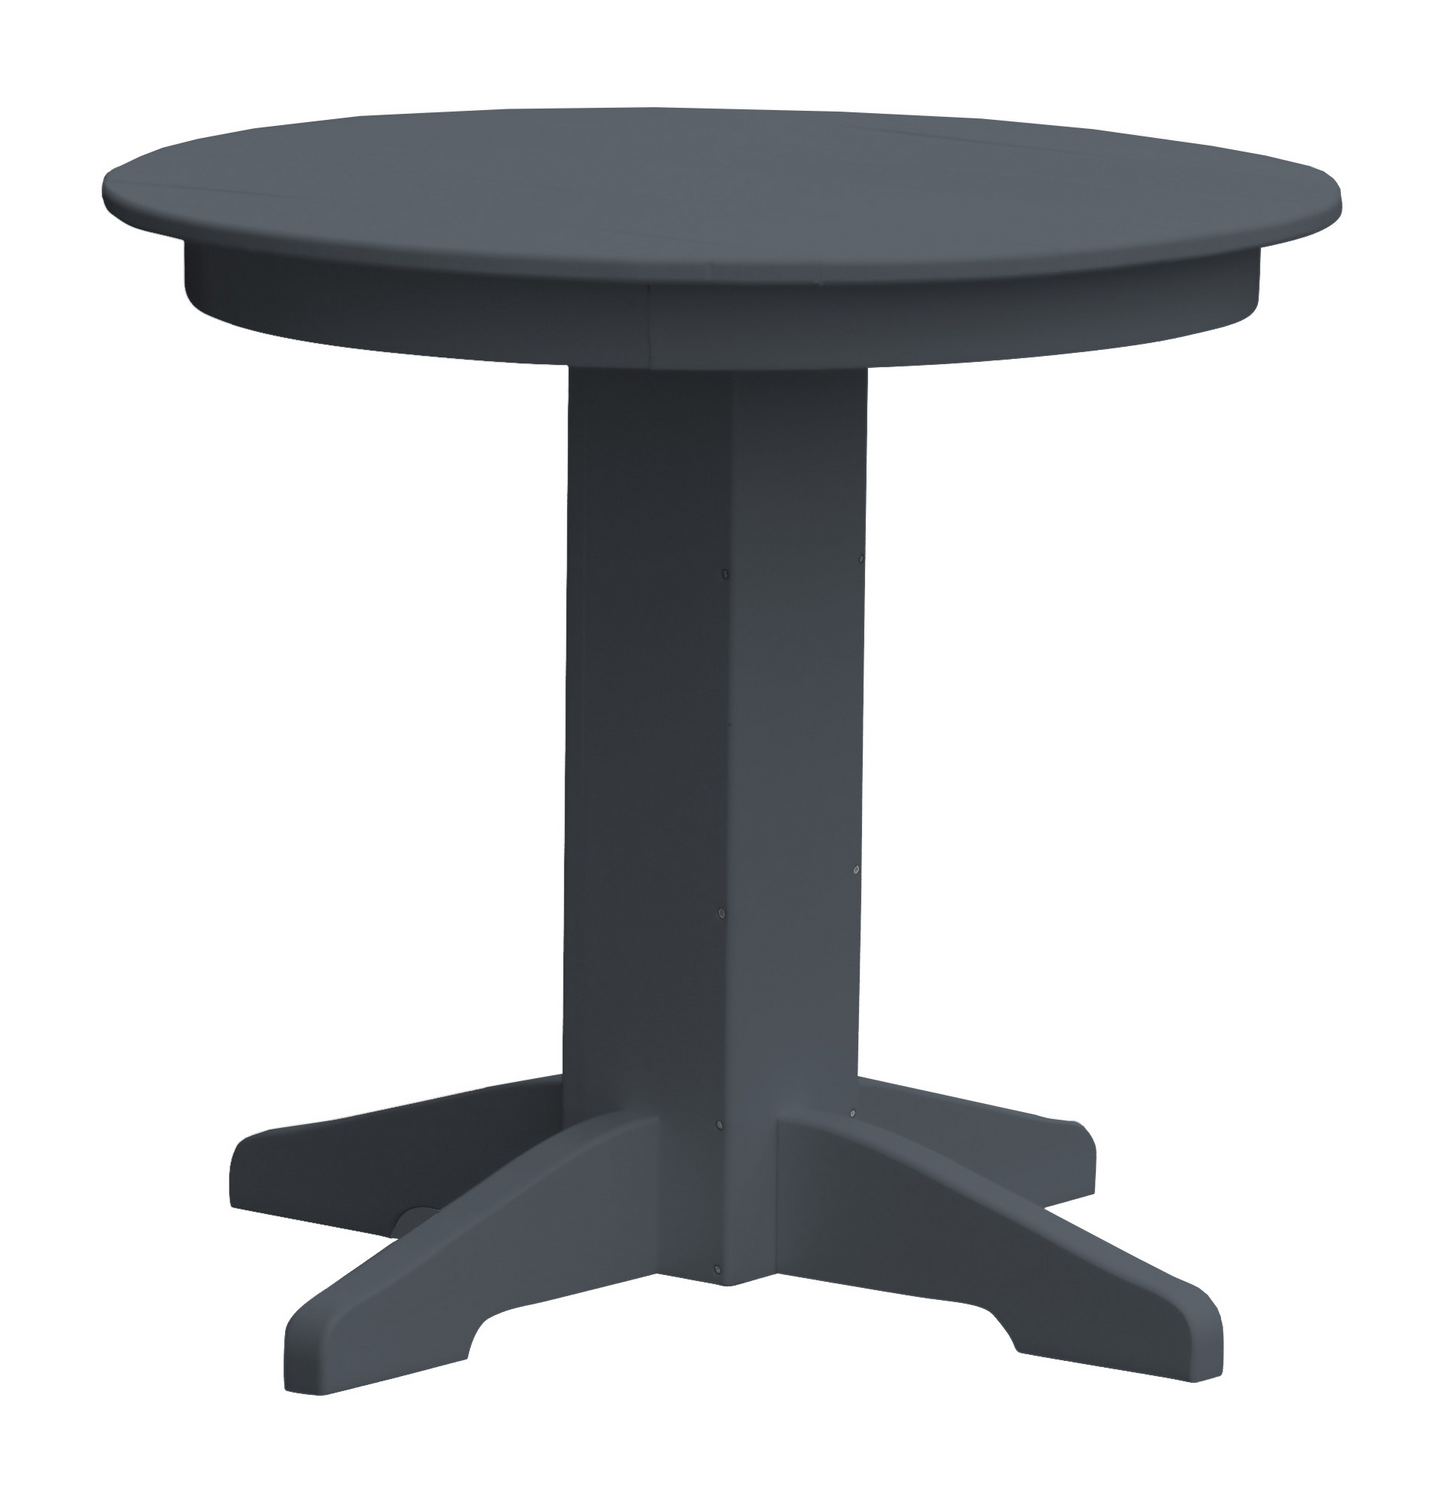 A&L Furniture Recycled Plastic 33" Round Dining Table - Dark Gray